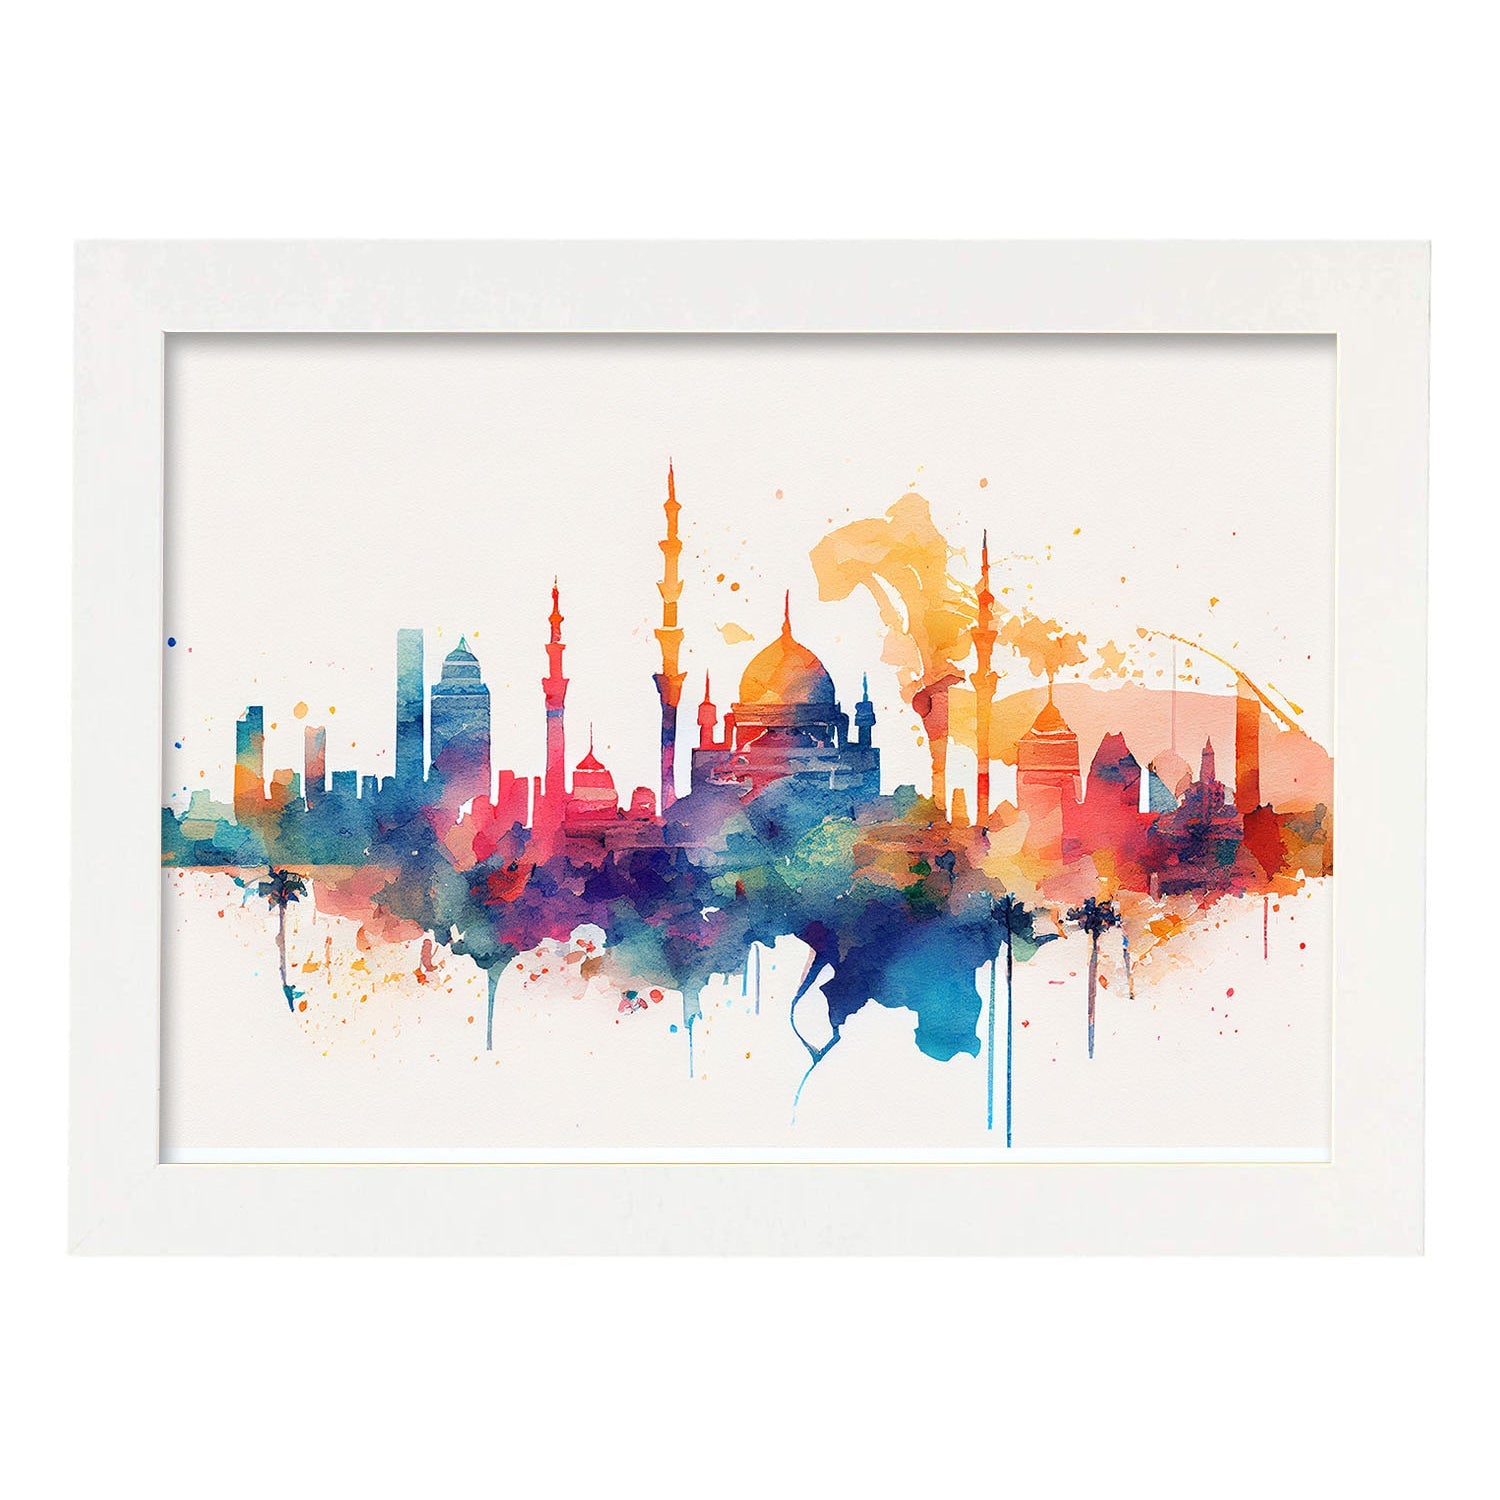 Nacnic watercolor of a skyline of the city of Cairo. Aesthetic Wall Art Prints for Bedroom or Living Room Design.-Artwork-Nacnic-A4-Marco Blanco-Nacnic Estudio SL